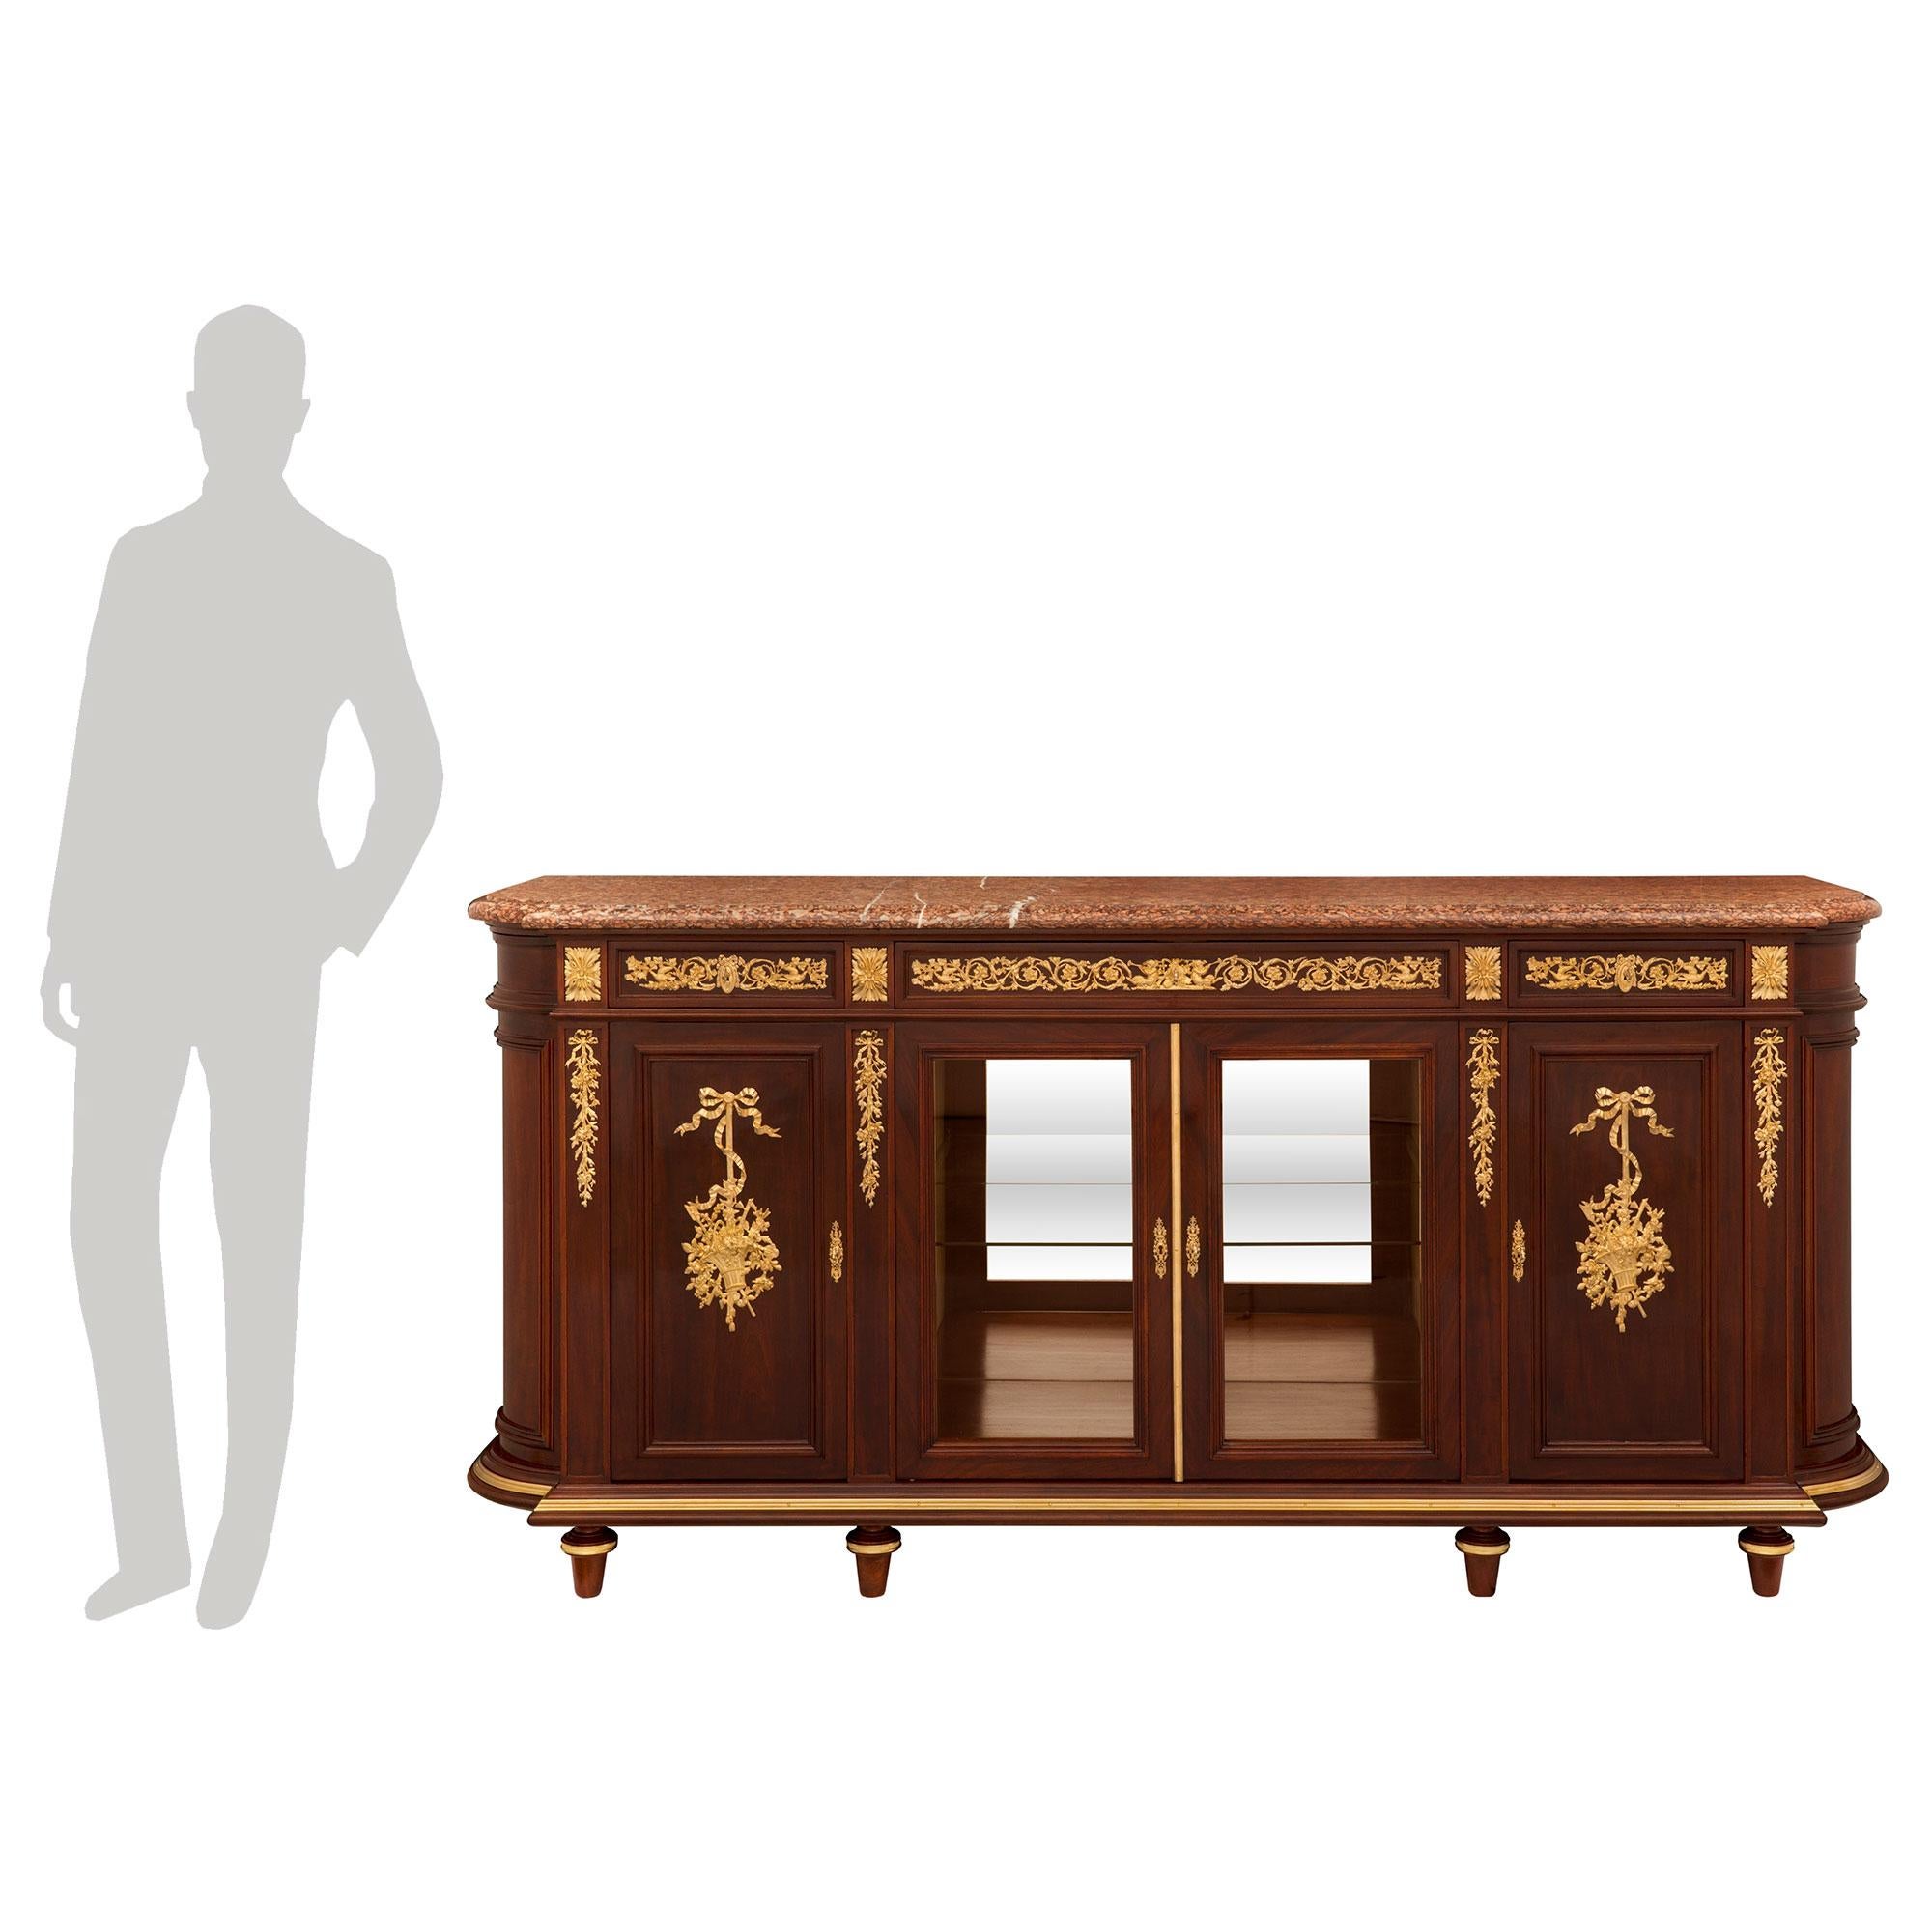 A stunning and extremely elegant French 19th century Louis XVI st. Belle Époque period mahogany, ormolu and Campan Rouge marble buffet, attributed to Maison Krieger. The four door, three drawer buffet is raised by fine circular tapered feet with